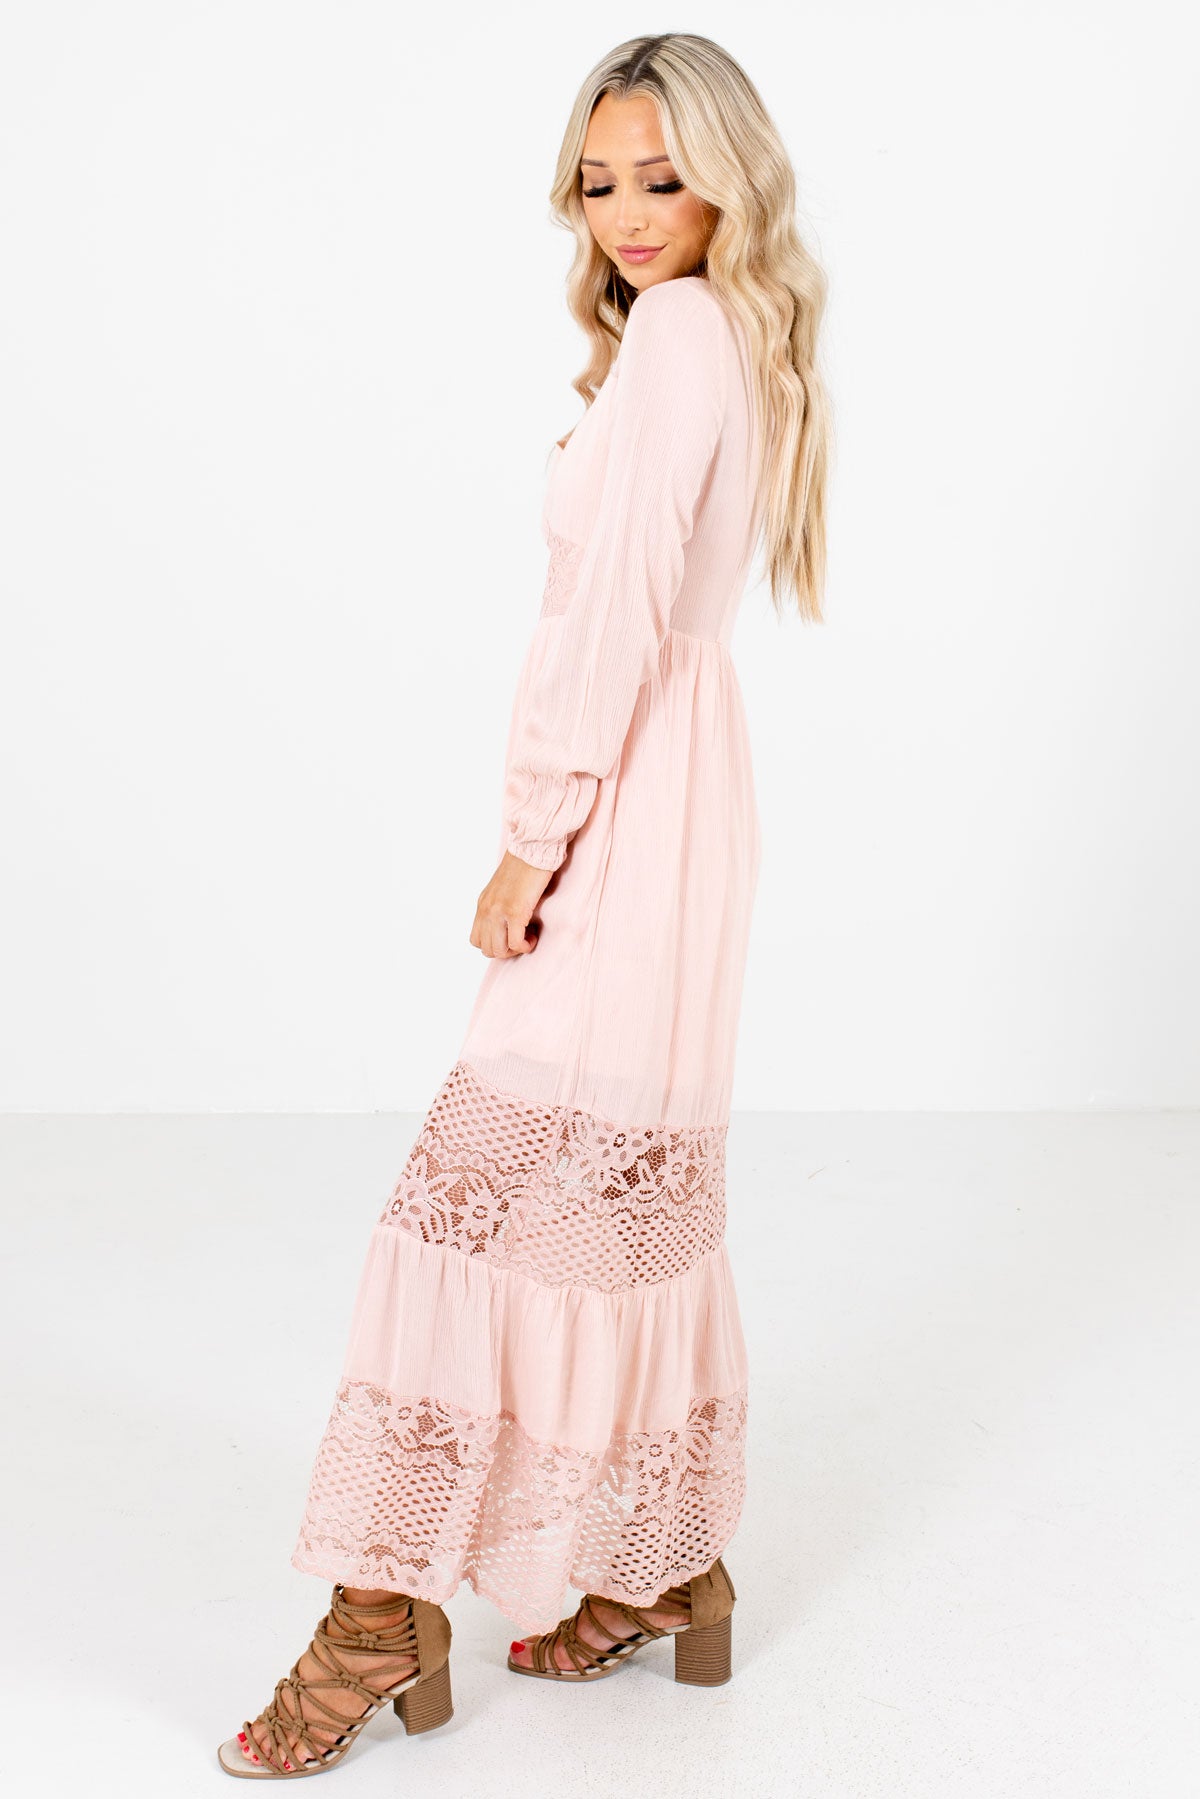 Pink Long Sleeve Boutique Maxi Dresses for Women